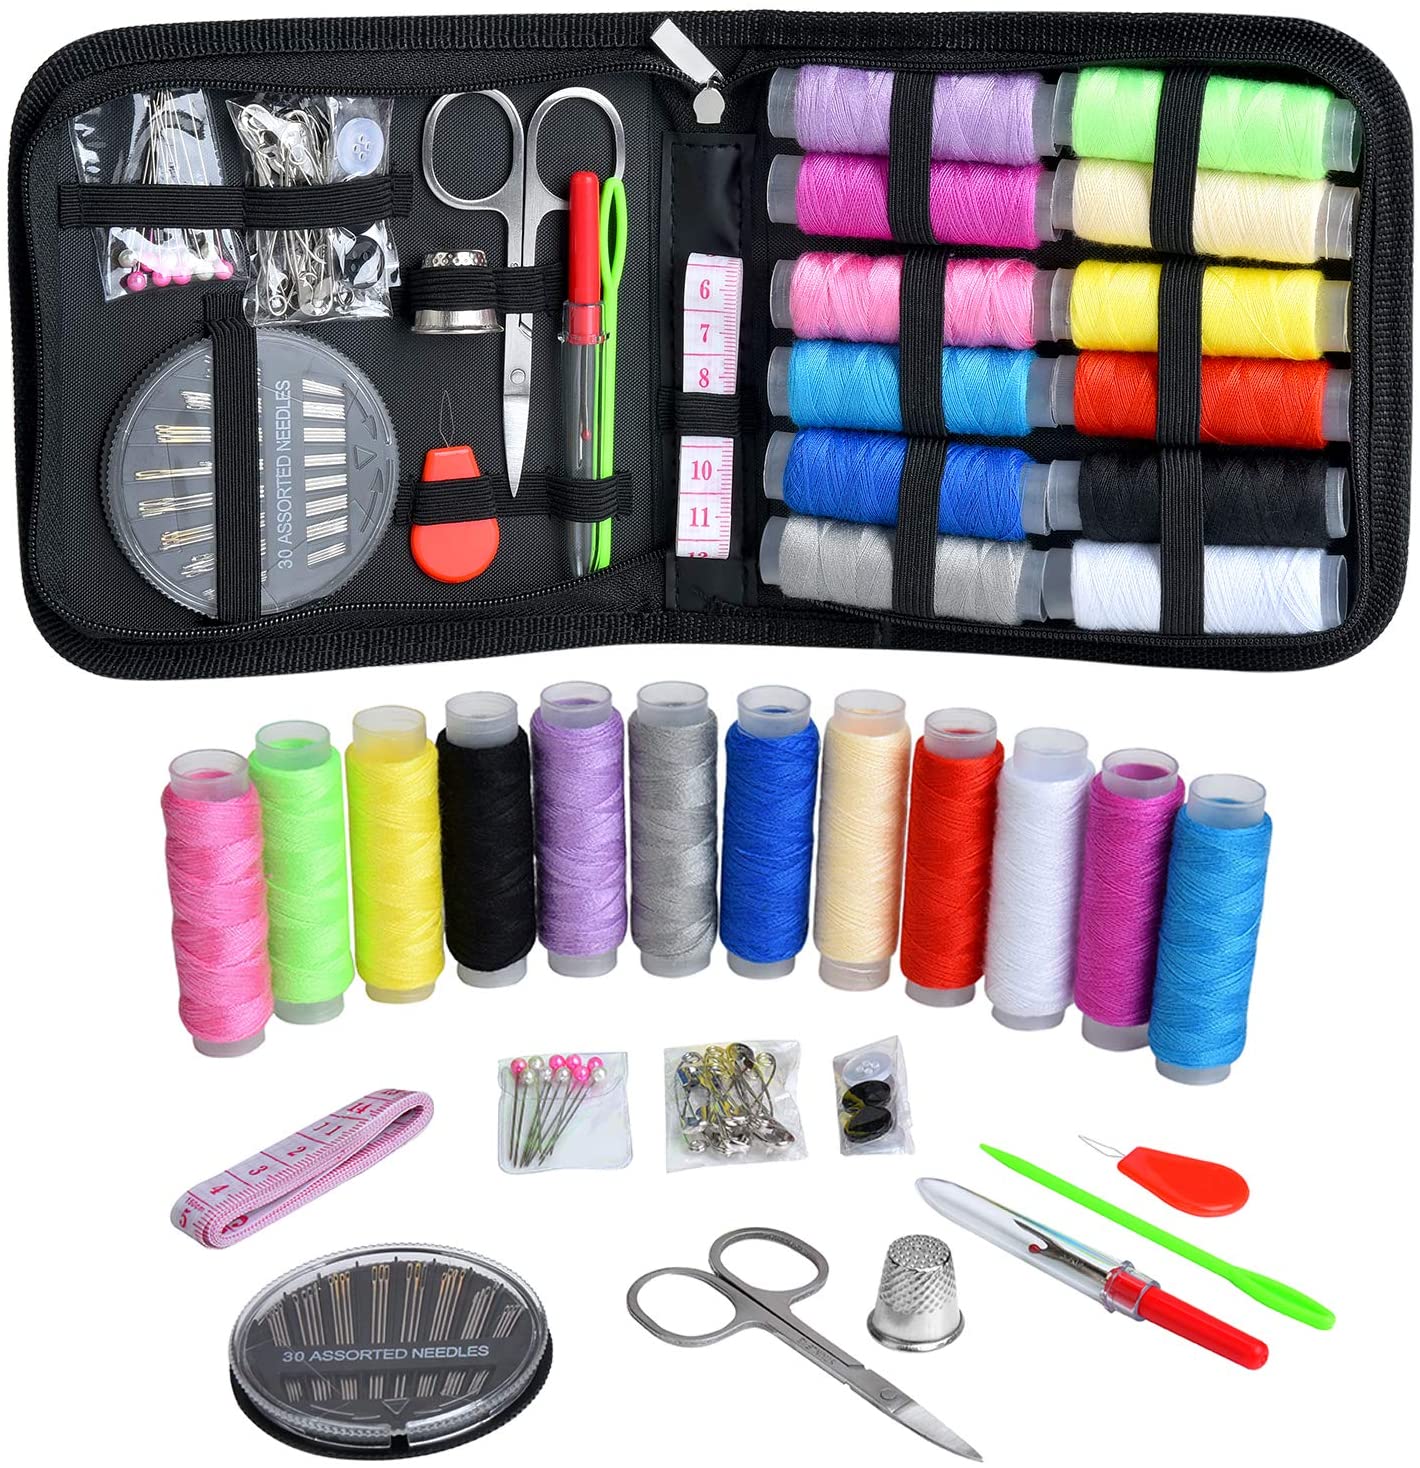 Coquimbo Sewing Kit for Traveler, Adults, Beginner, Emergency, DIY Sewing Supplies